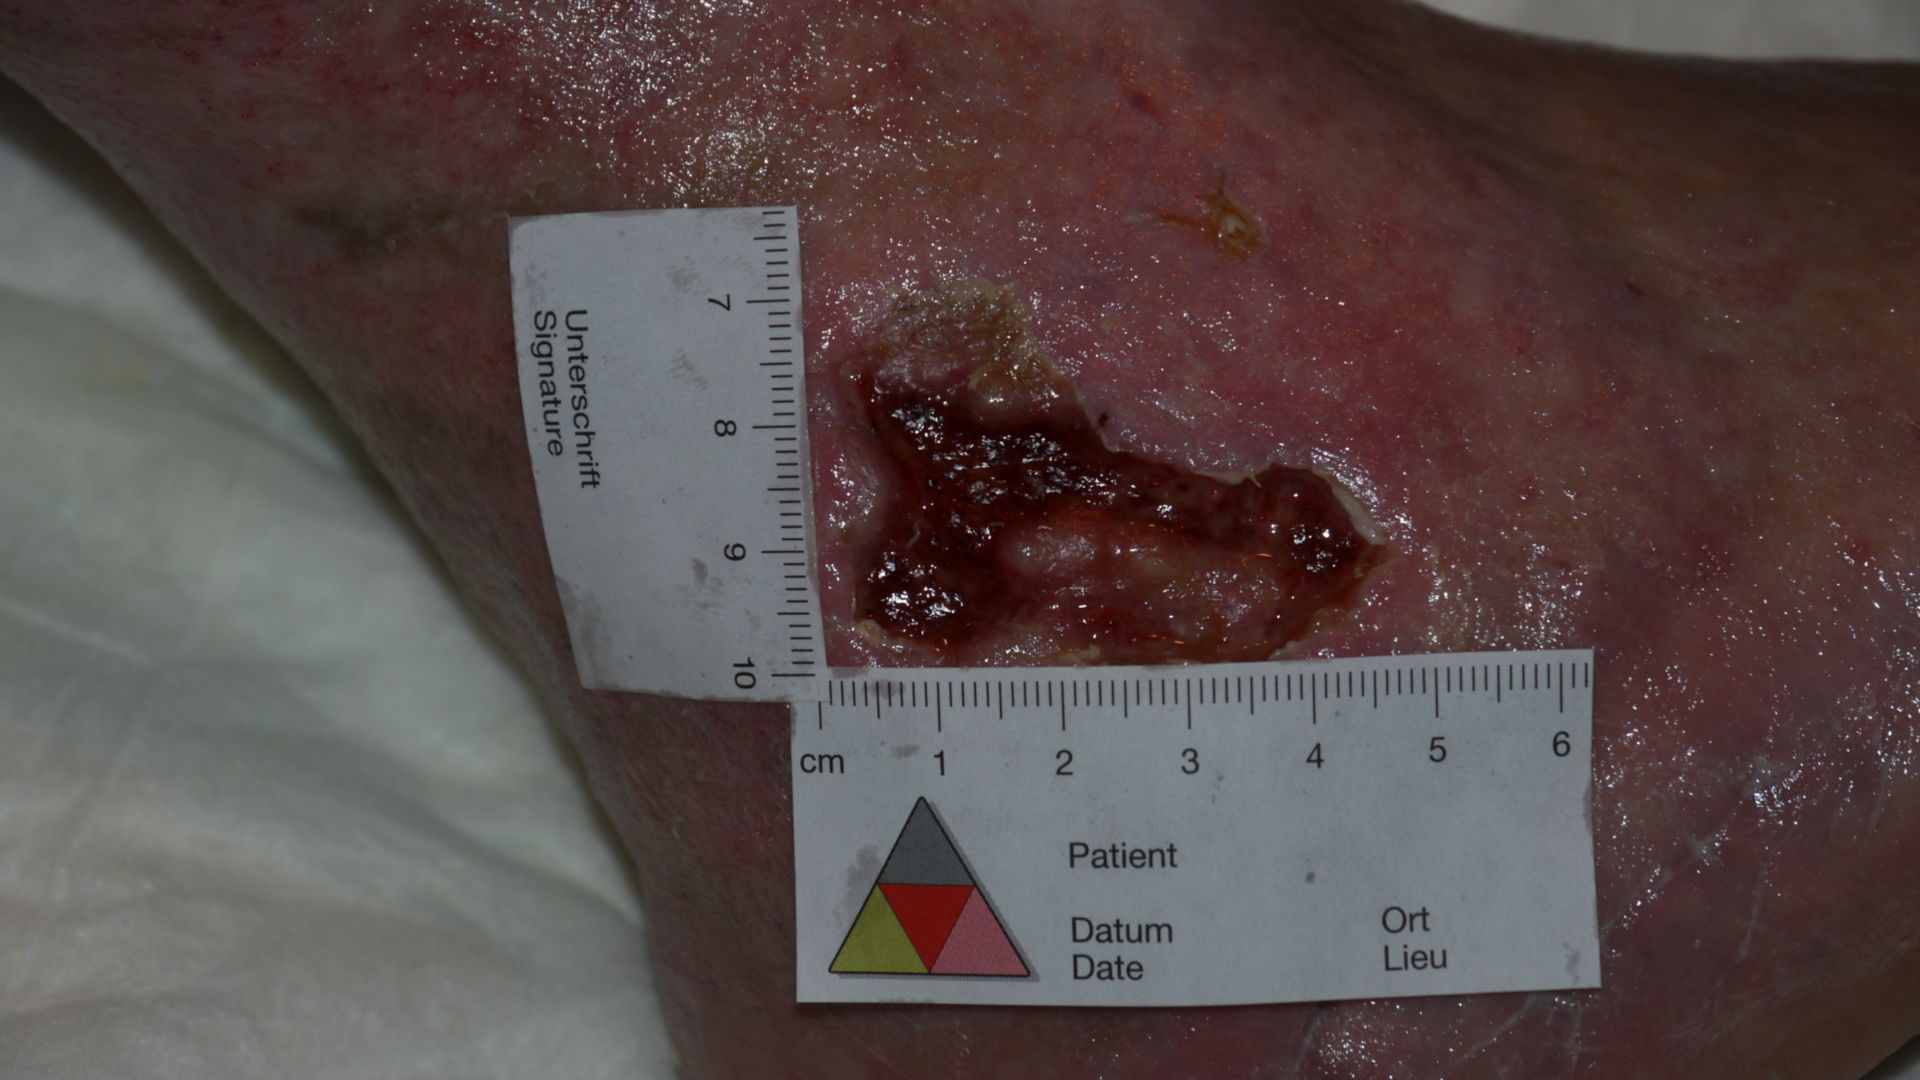 Ulcer on the ankle